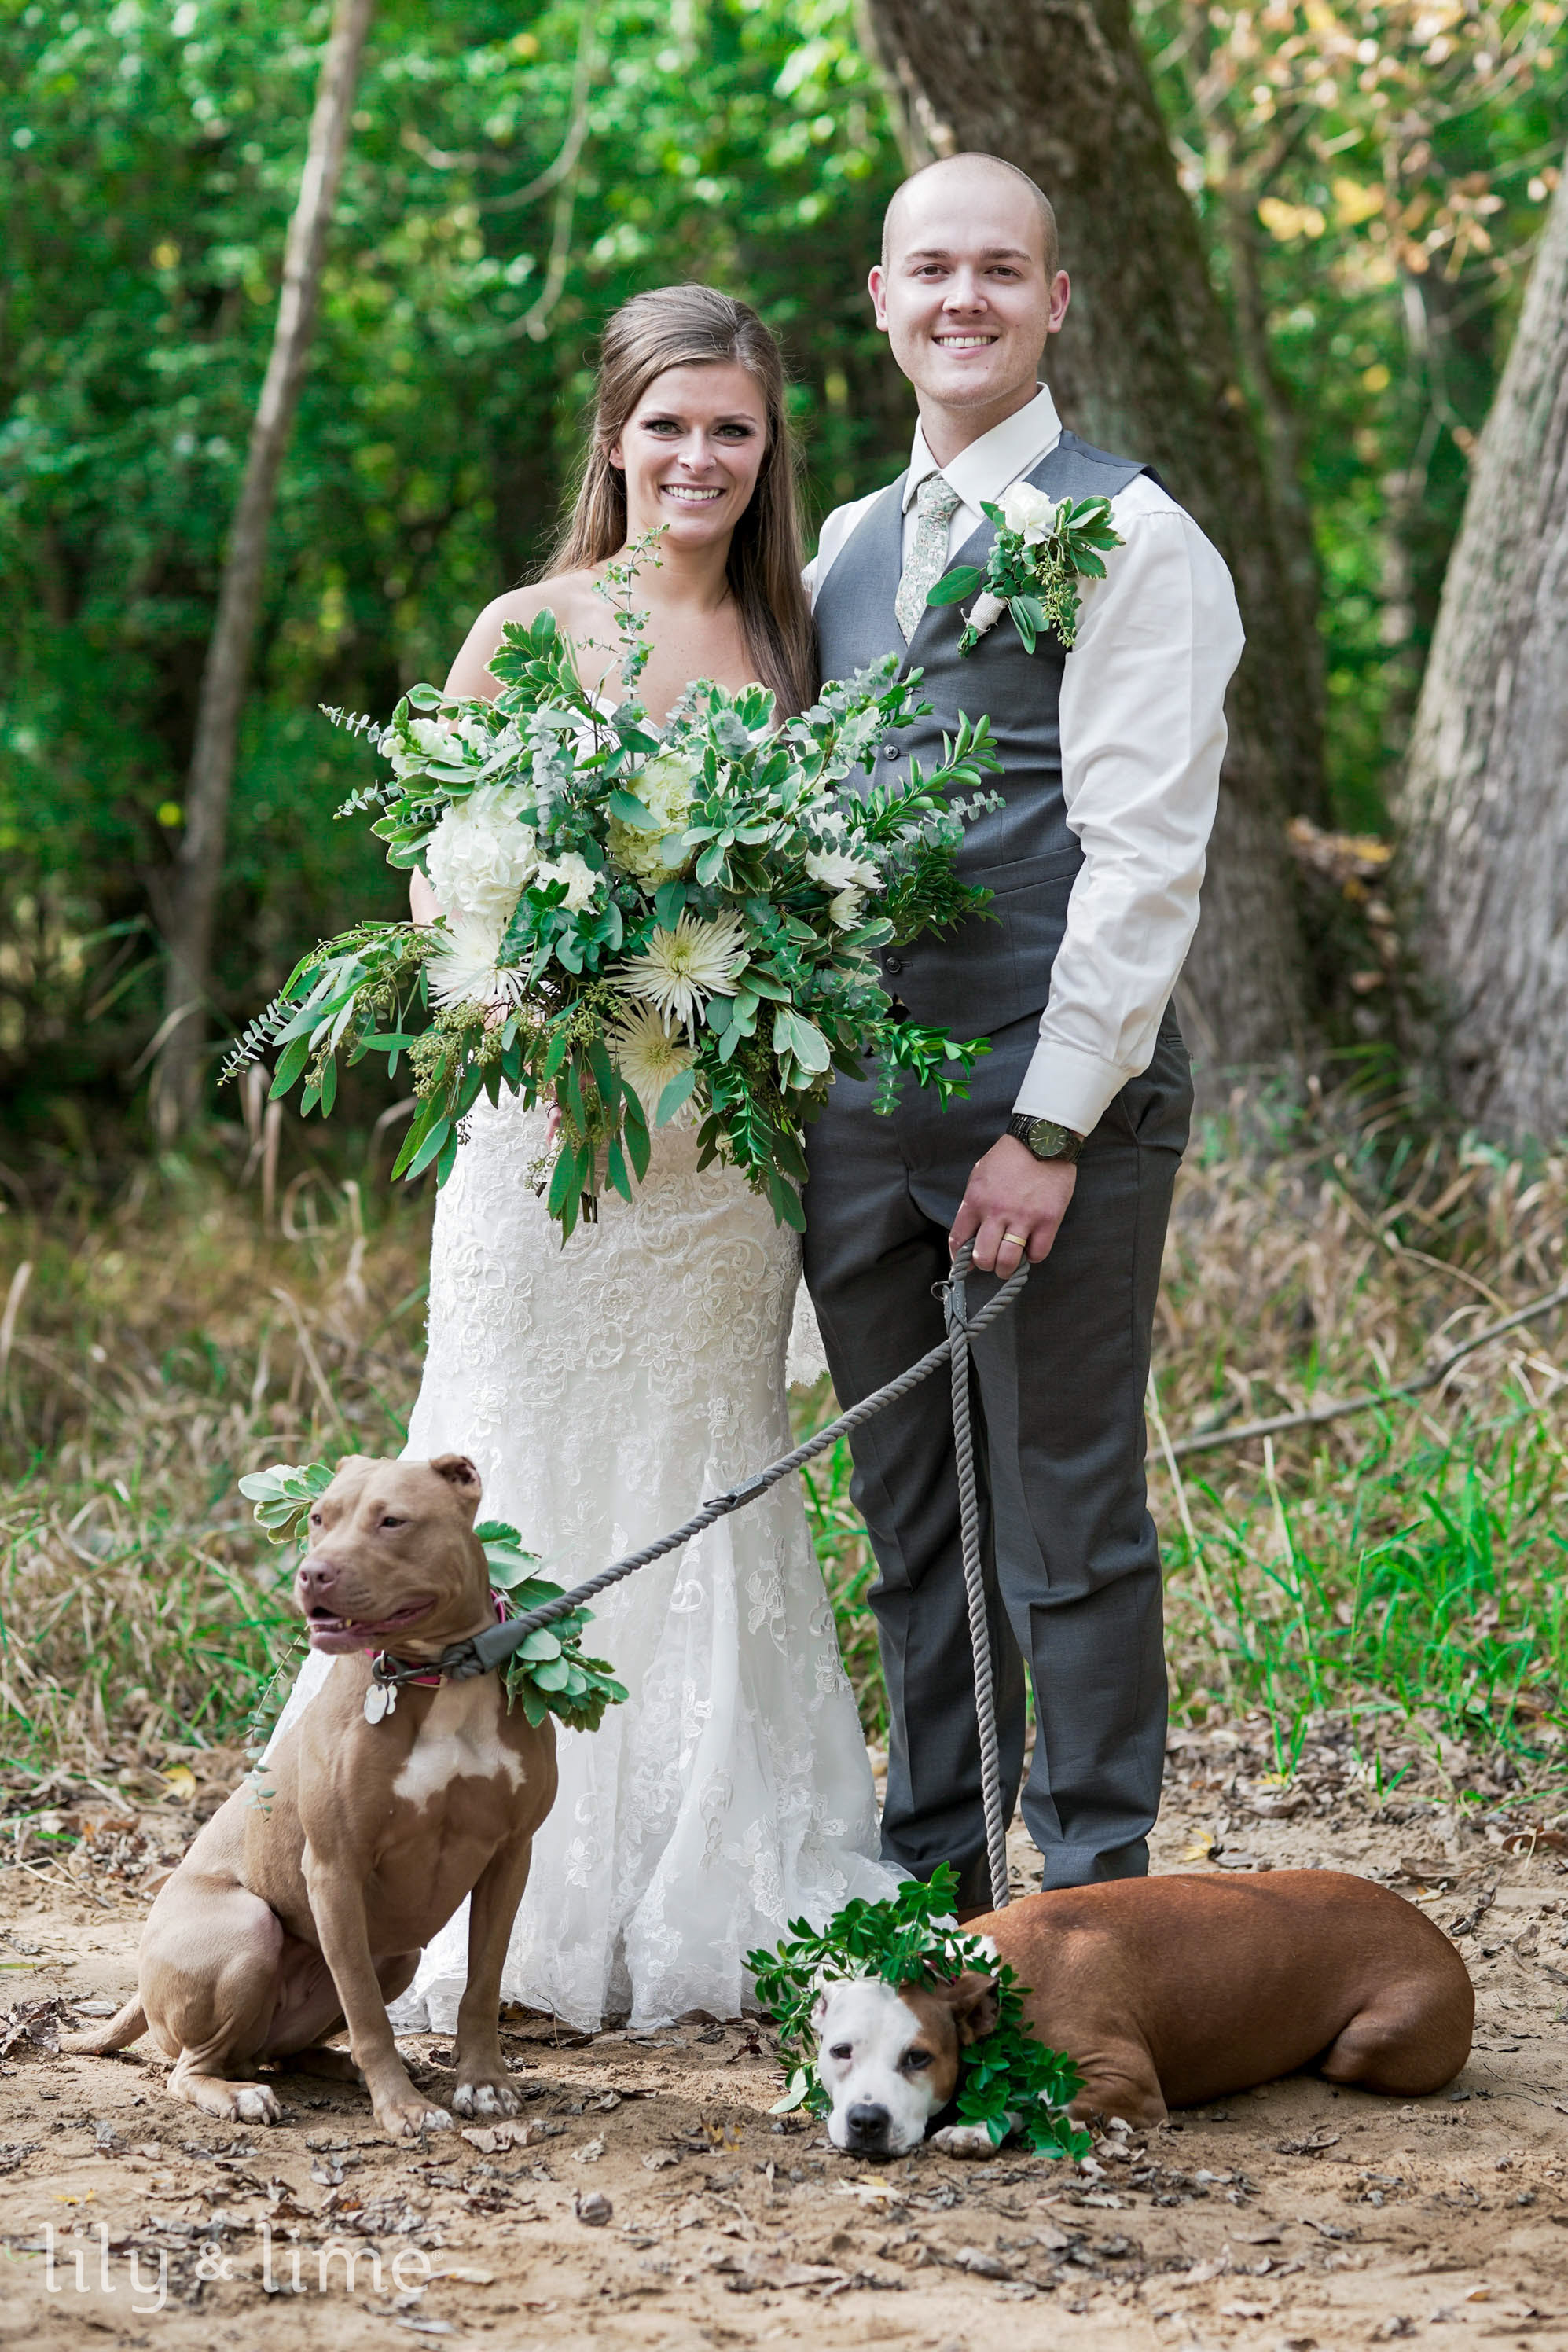 Our Wedding: Bridal Party Attire — Have Dog, Will Drive